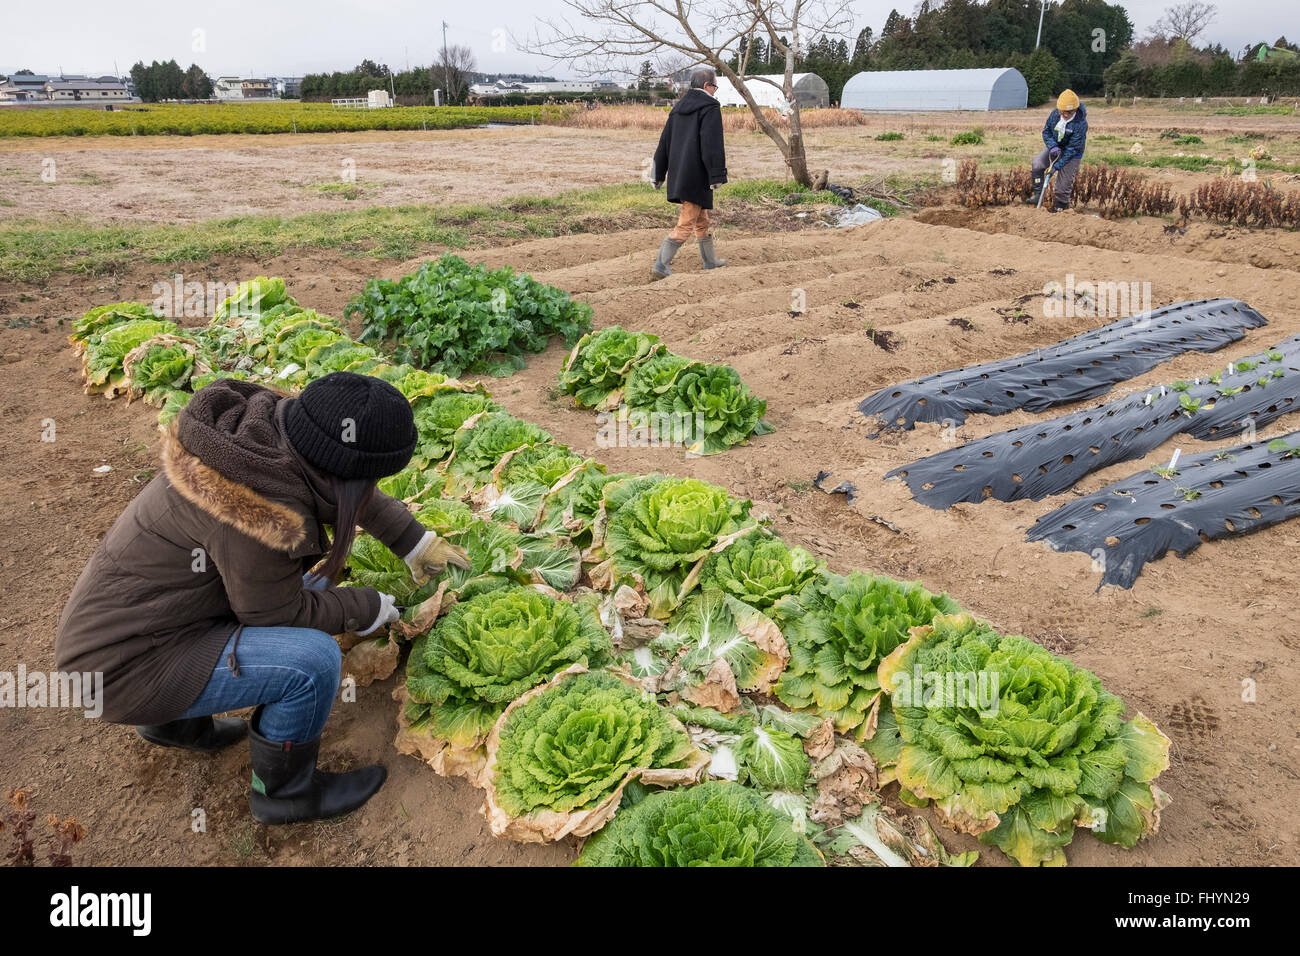 A volunteer from the aid agency Caritas, picks Chinese cabbage on land that has been affected by the 2011 earthquake, tsunami. Stock Photo